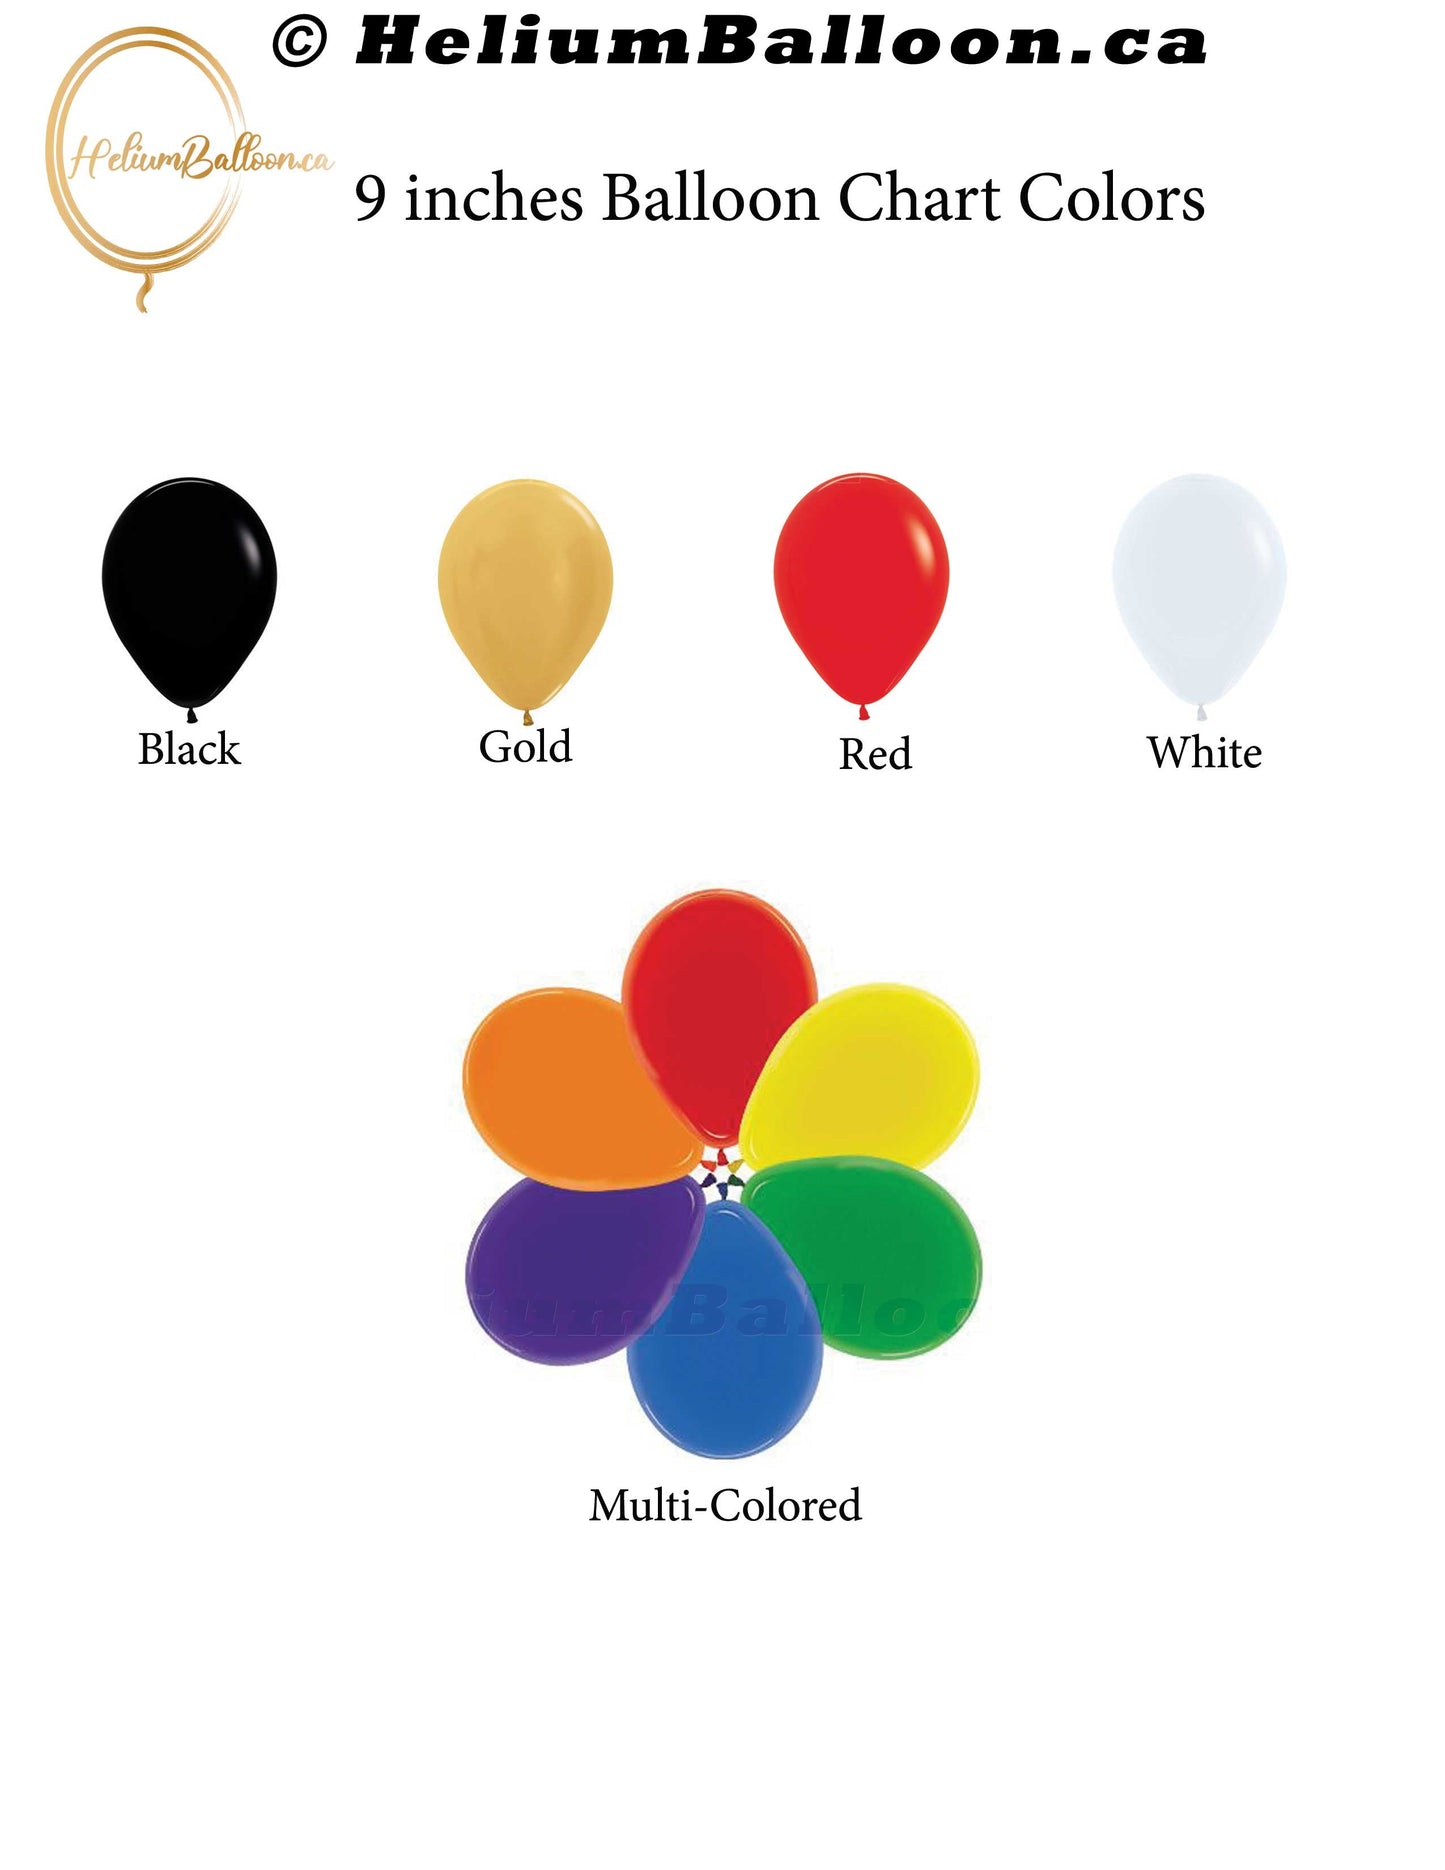 50 Latex Ceiling Balloons 9 inches - FLOATING TIME 7 HOURS - ( Colors Available )